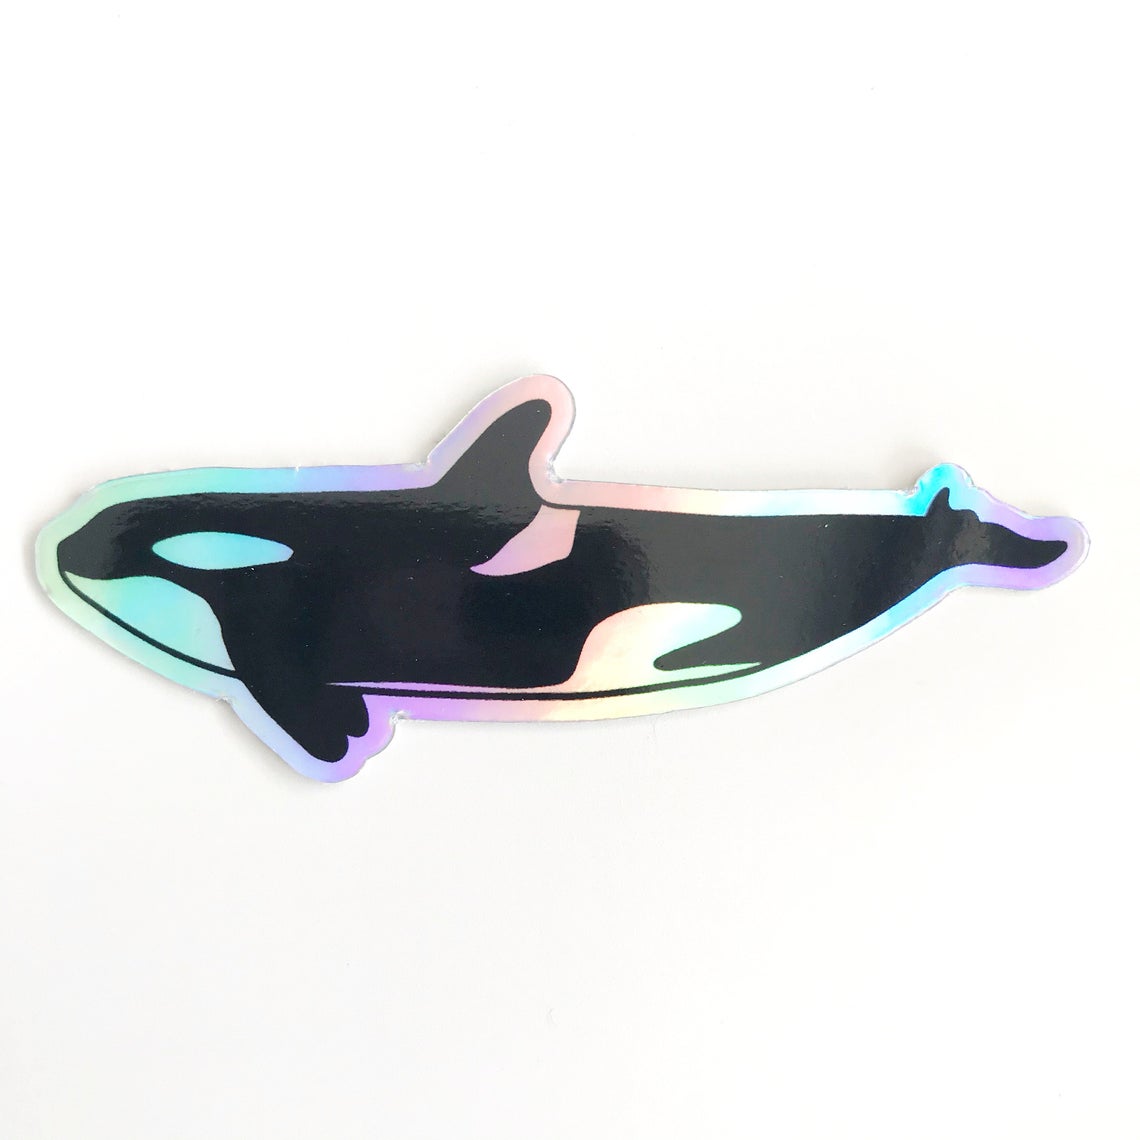 Holographic Orca Sticker